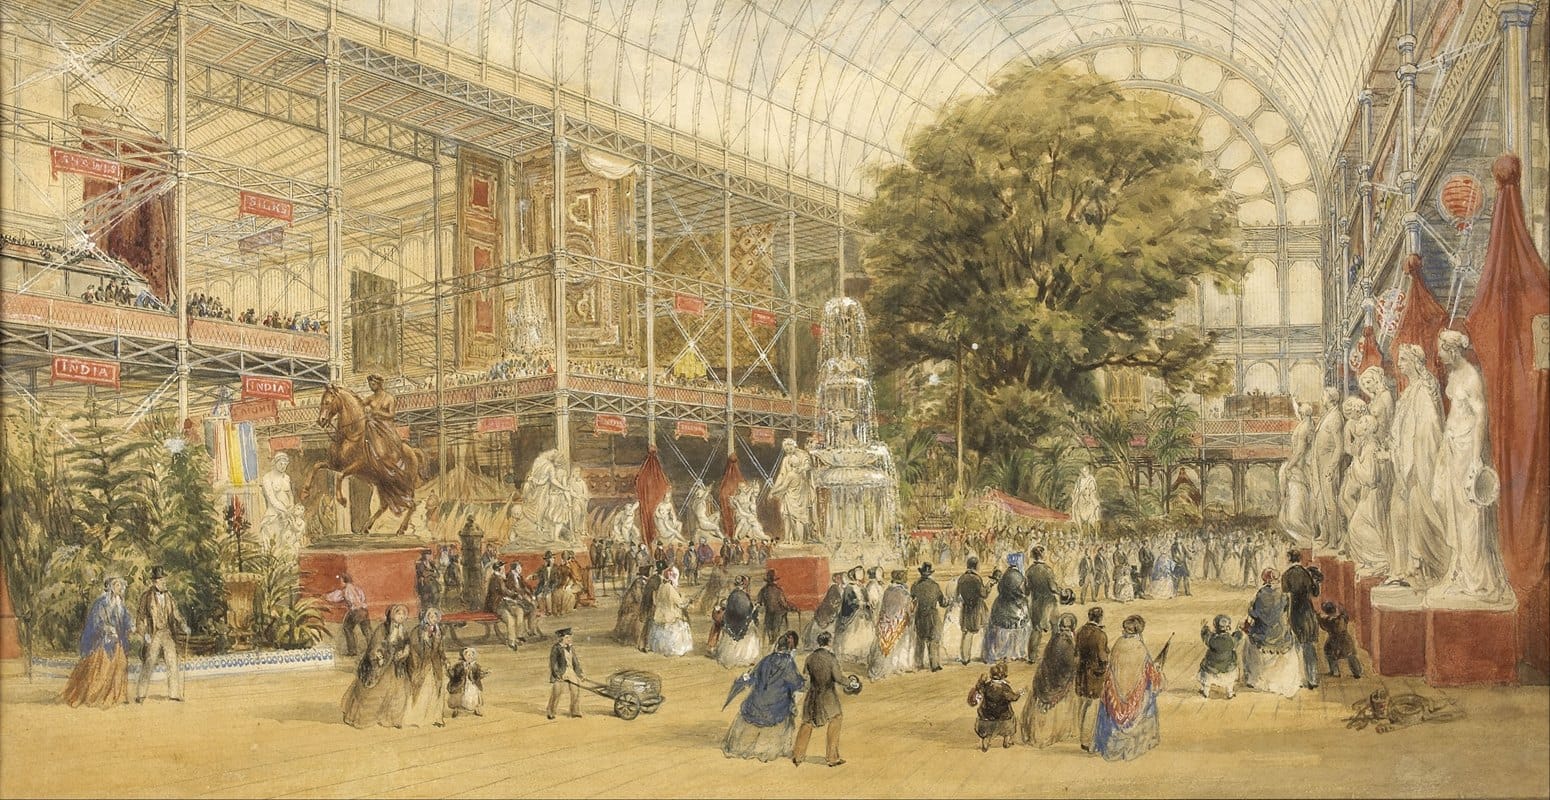 Thomas Abel Prior - Queen Victoria opening the 1851 Universal Exhibition, at the Crystal Palace in London